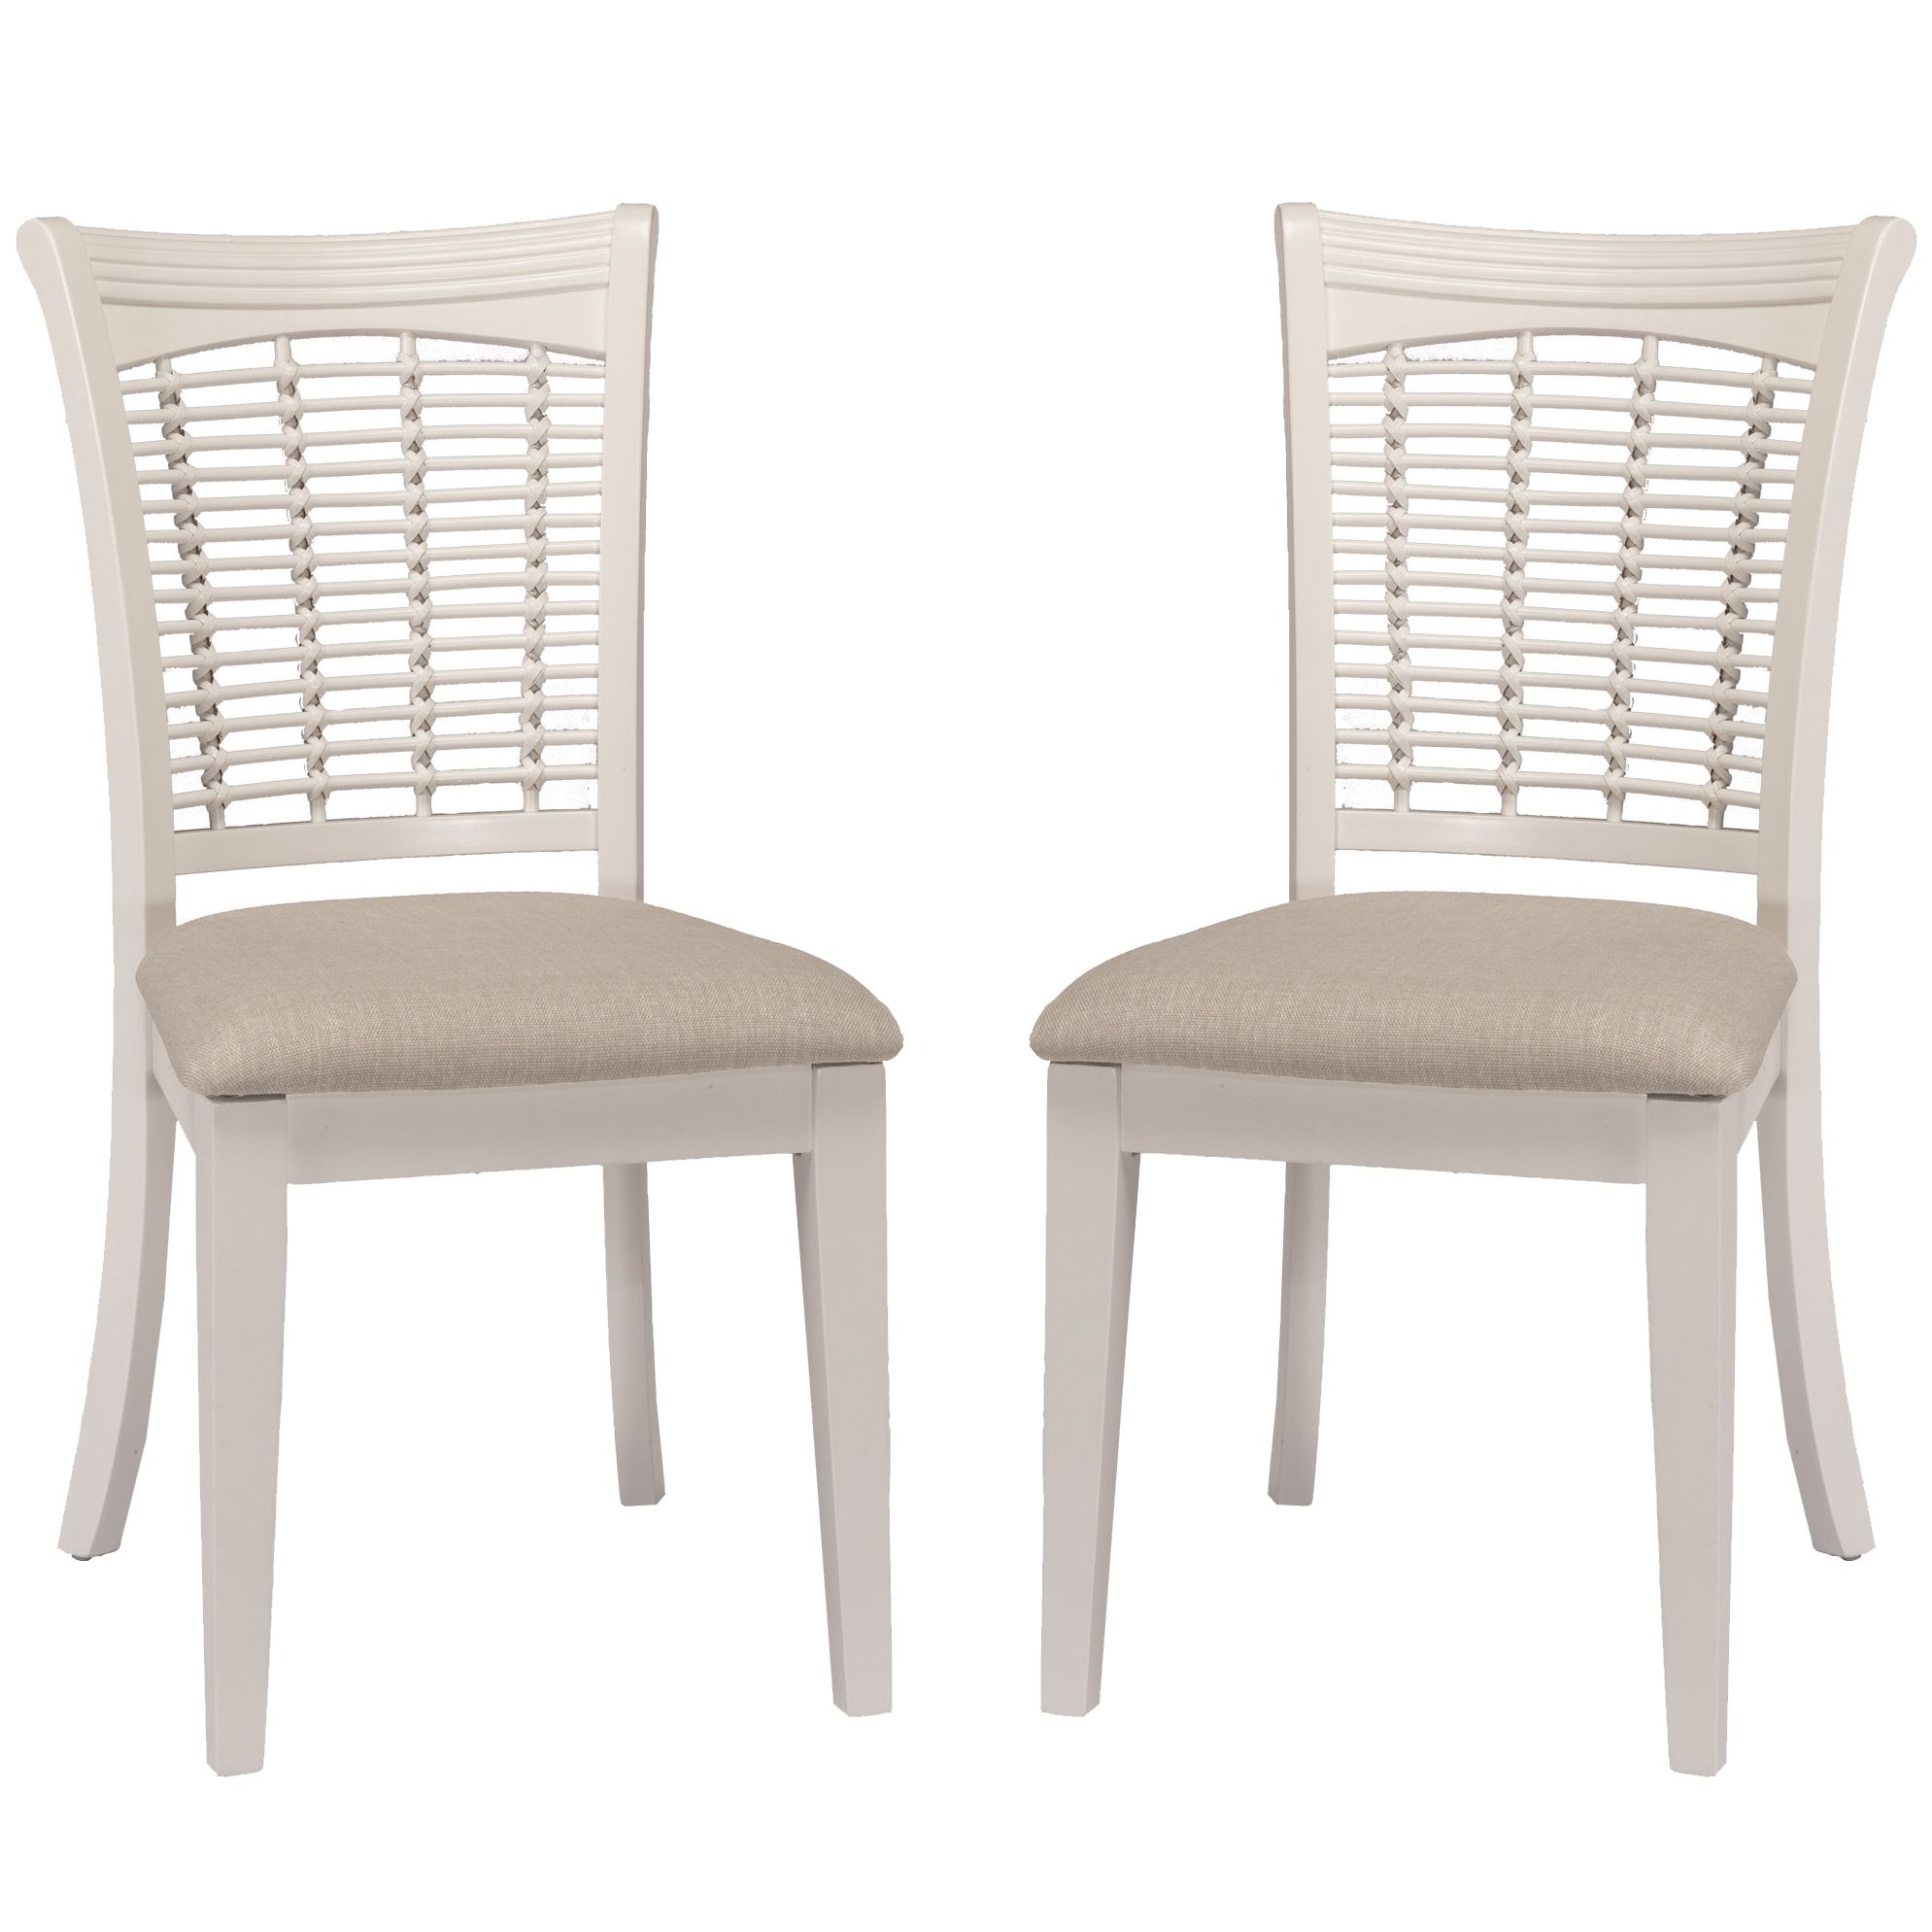 Bayberry Wood Dining Chair, Set of 2